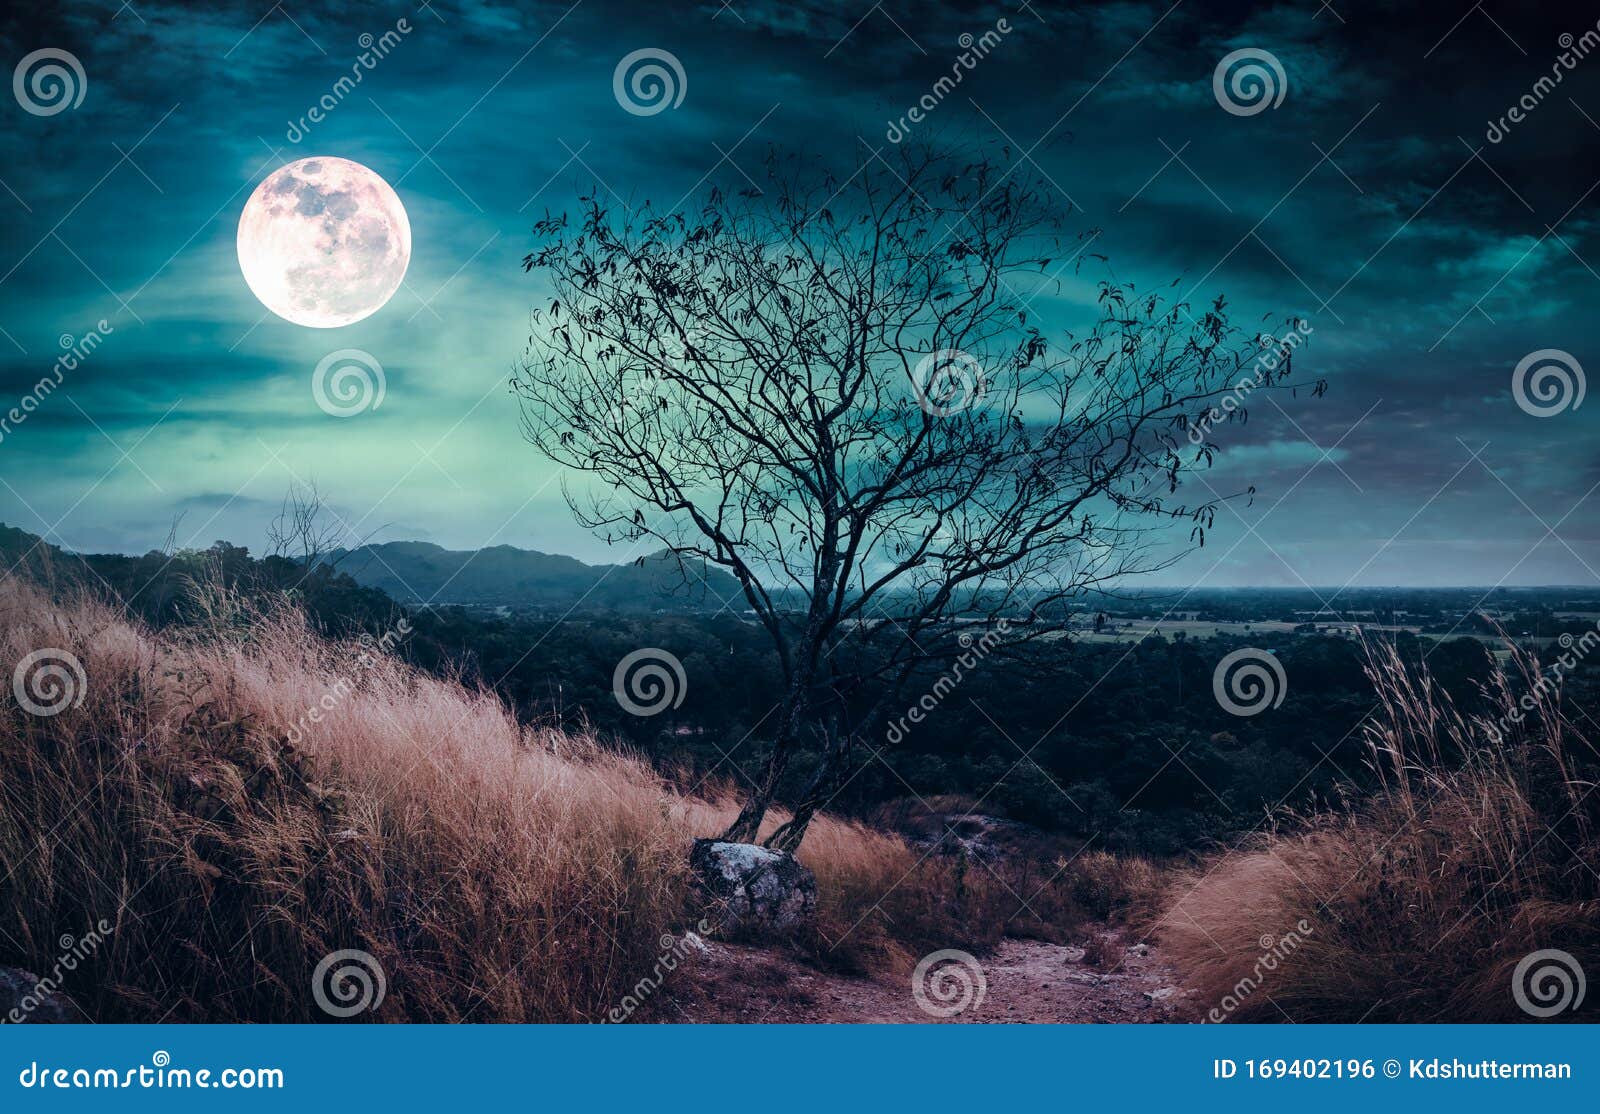 Beautiful Bright Full Moon Above Wilderness Area in Forest ...